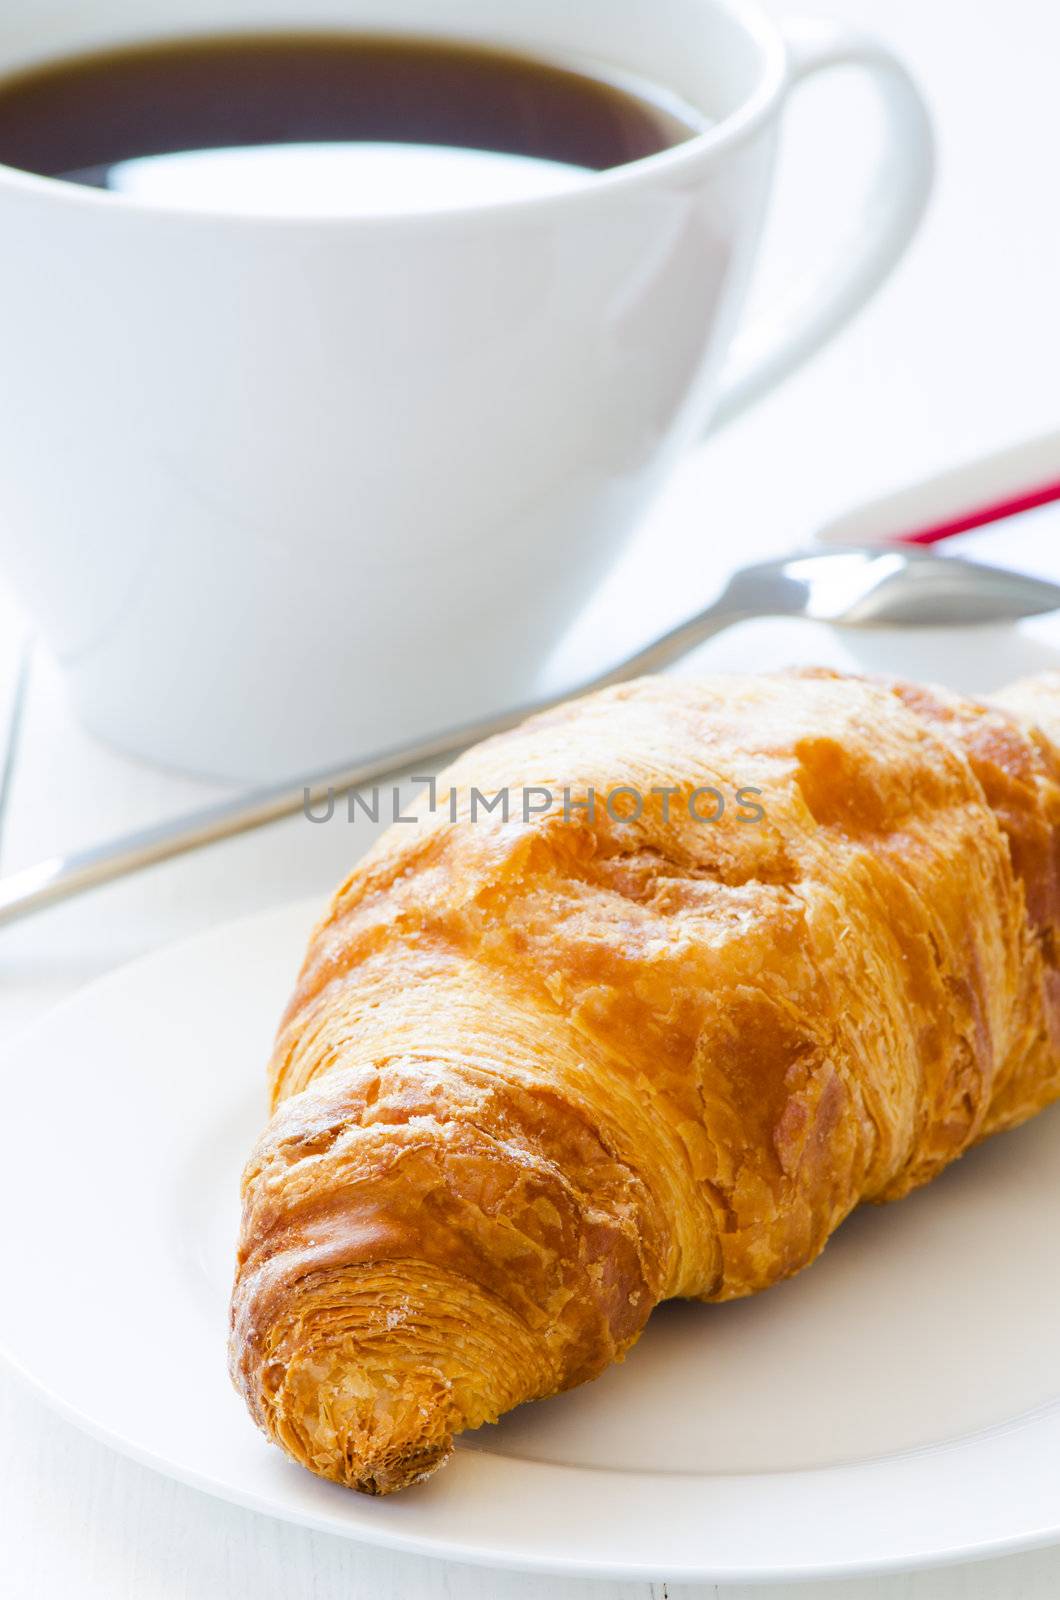 Croissant with coffeee on a background